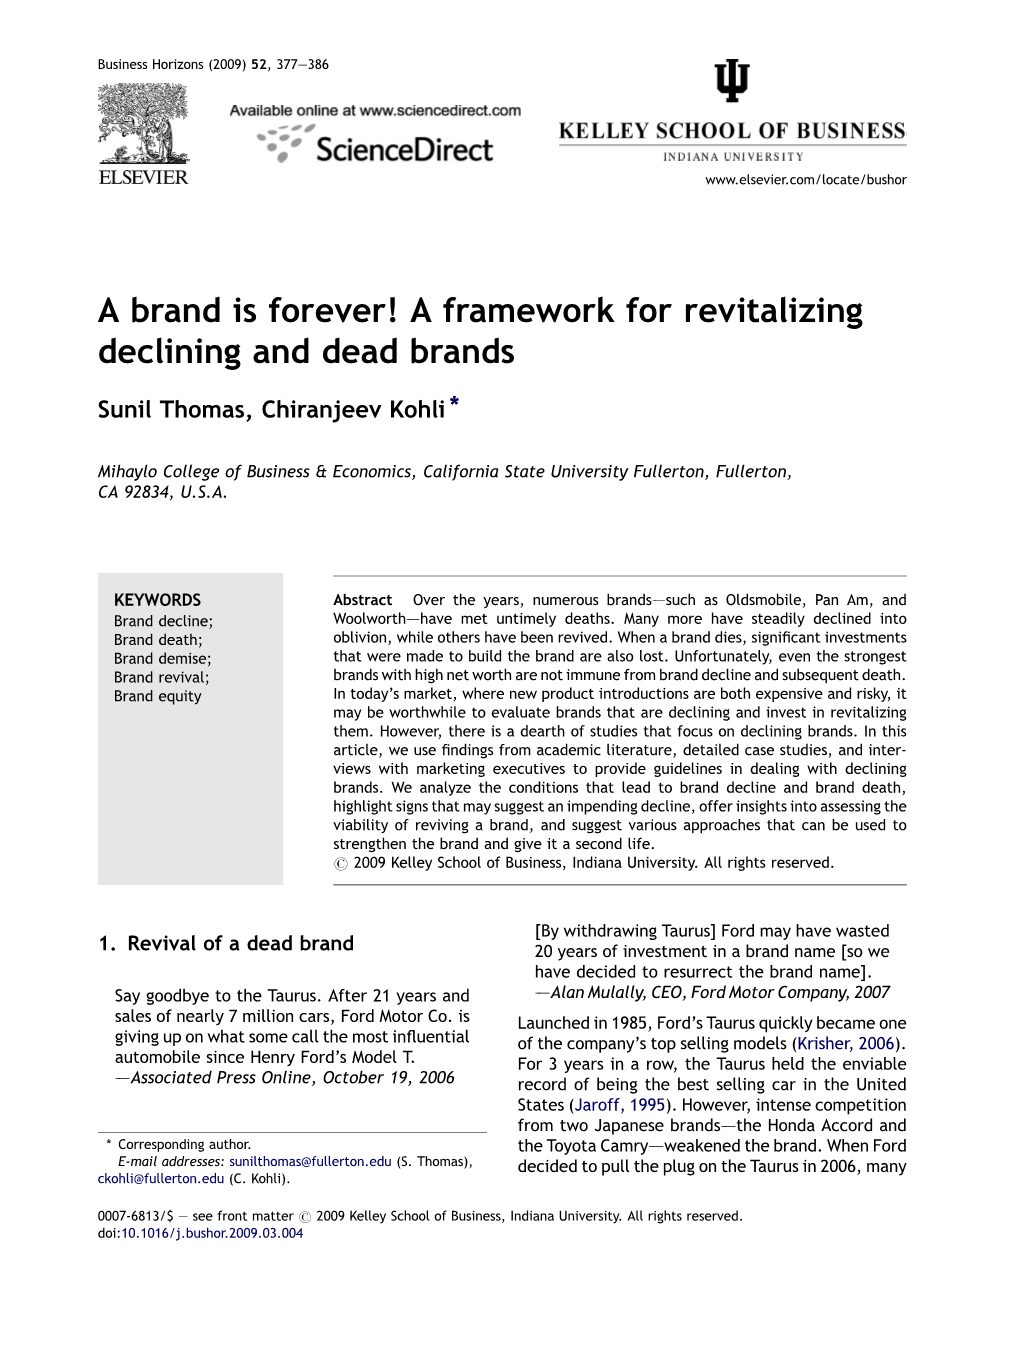 A Brand Is Forever! a Framework for Revitalizing Declining and Dead Brands